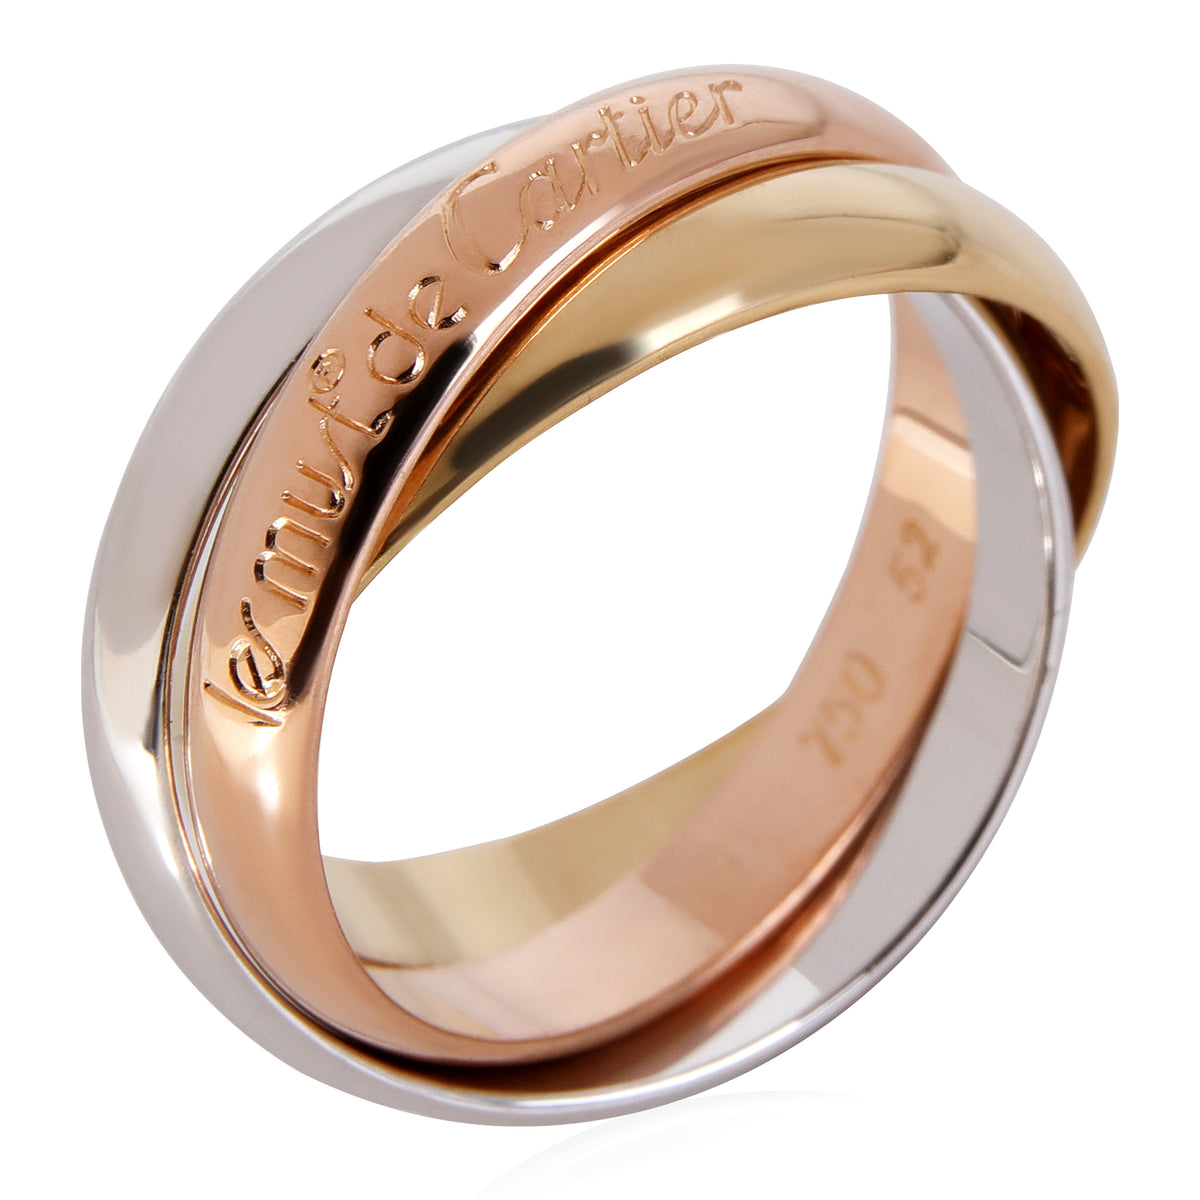 Cartier Trinity Ring in 18k 3 Tone Gold